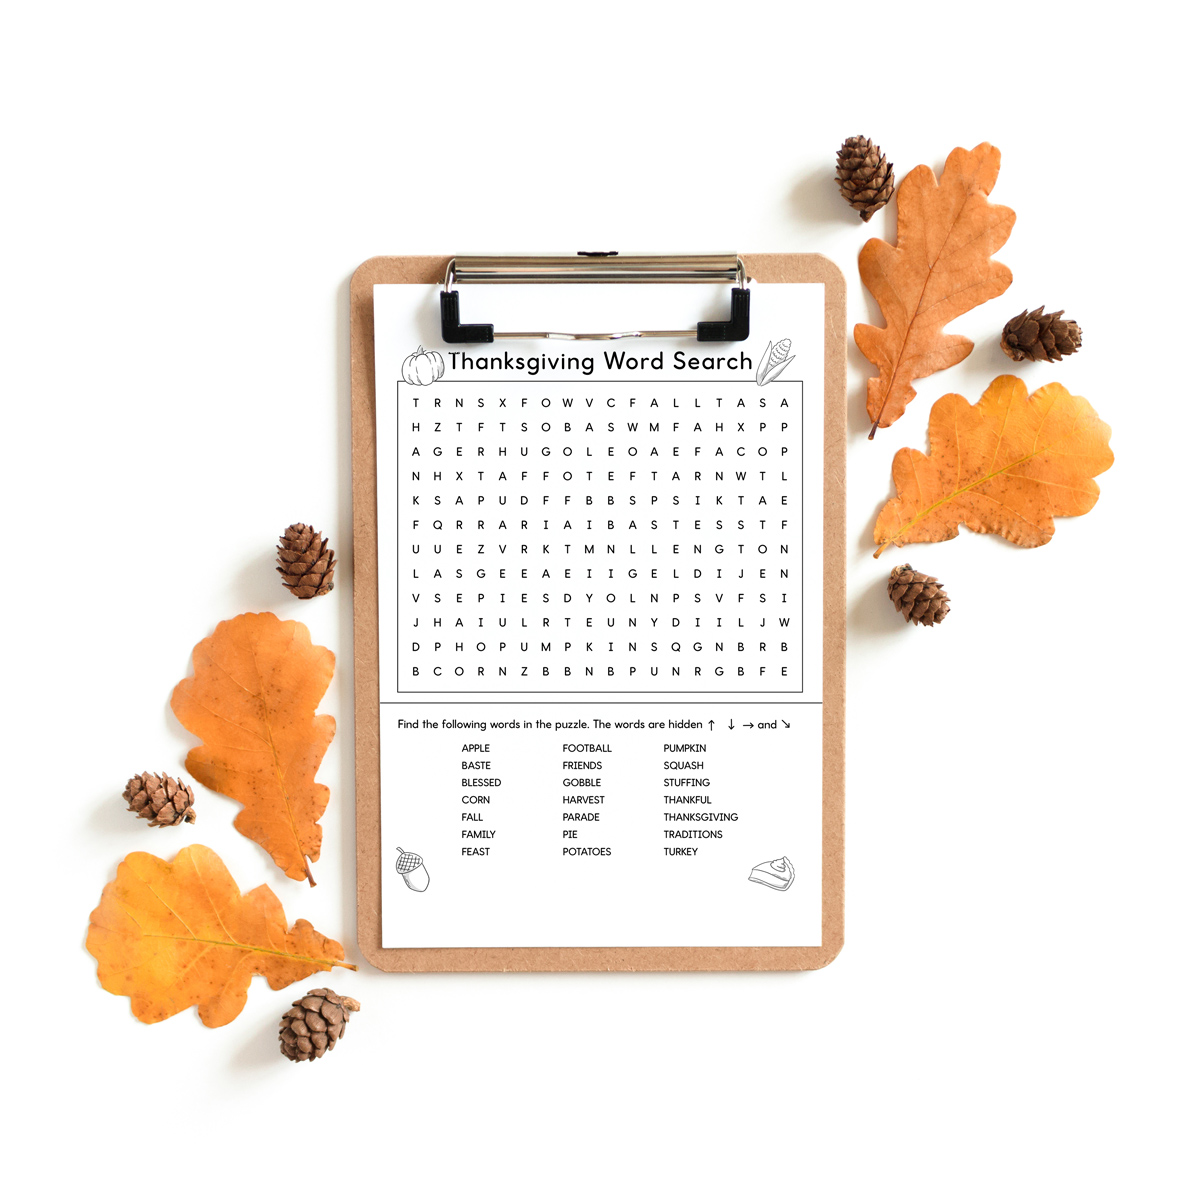 This image shows a Thanksgiving Word search printable which you can get at the end of the blog post. This example is showing the medium version. The word search is on a wooden clipboard and is surrounded by a few leaves and small pine cones. At the top of the word search, it says Thanksgiving word search. Below that is a grid of letters. Underneath that is a list of Thanksgiving themed words to search for (such as turkey, fall, football, and more). This example also has black and white Thanksgiving clip art including a pumpkin, ear of corn, acorn, and slice of pumpkin pie. 